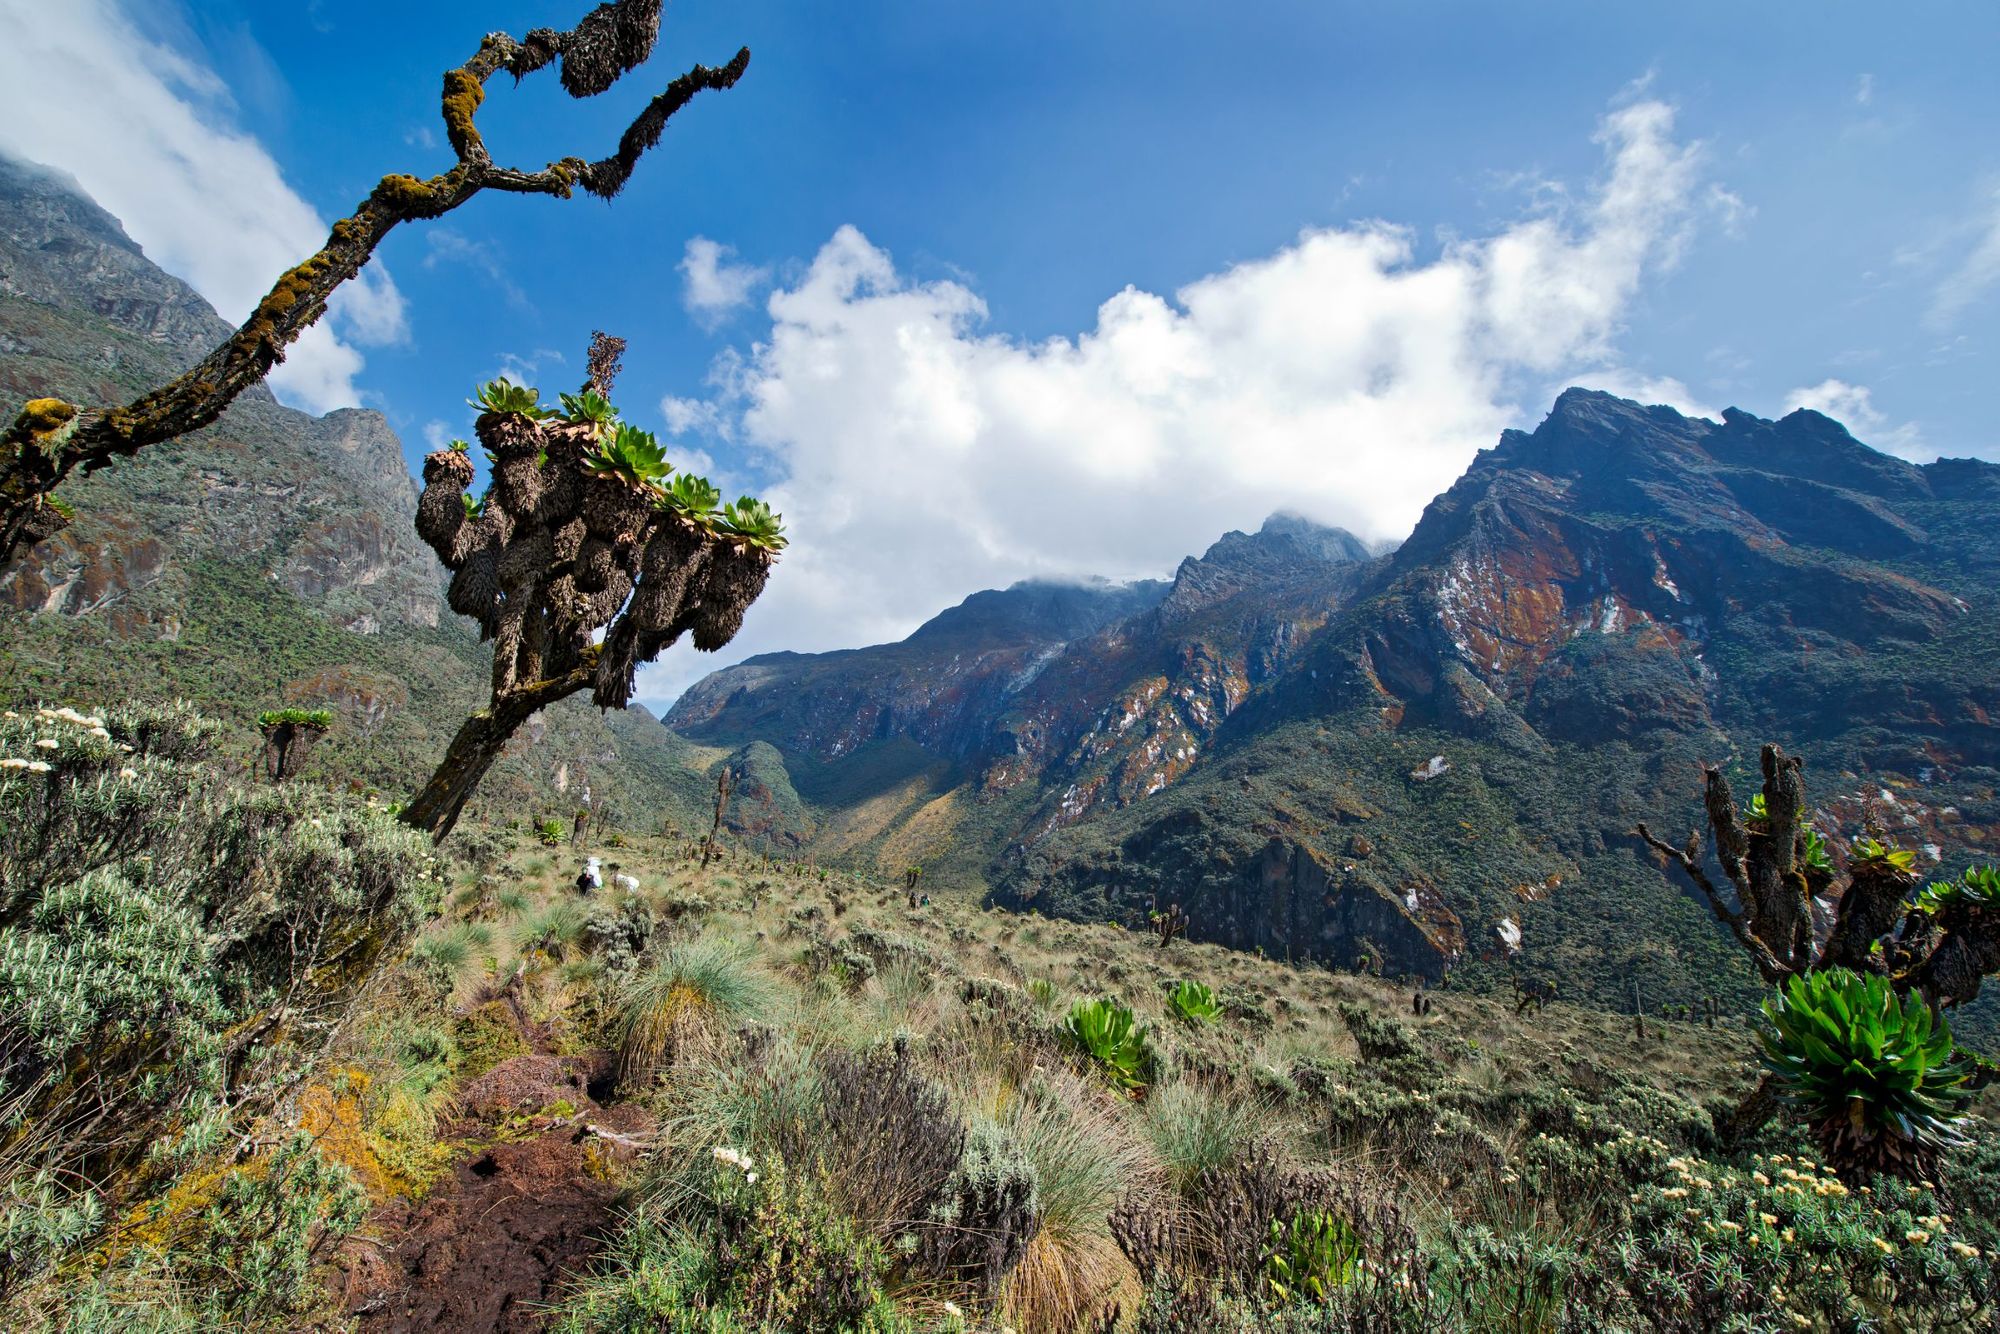 A view of the Rwenzori mountains featuring some of the signature groundsels, a unique species of tree.